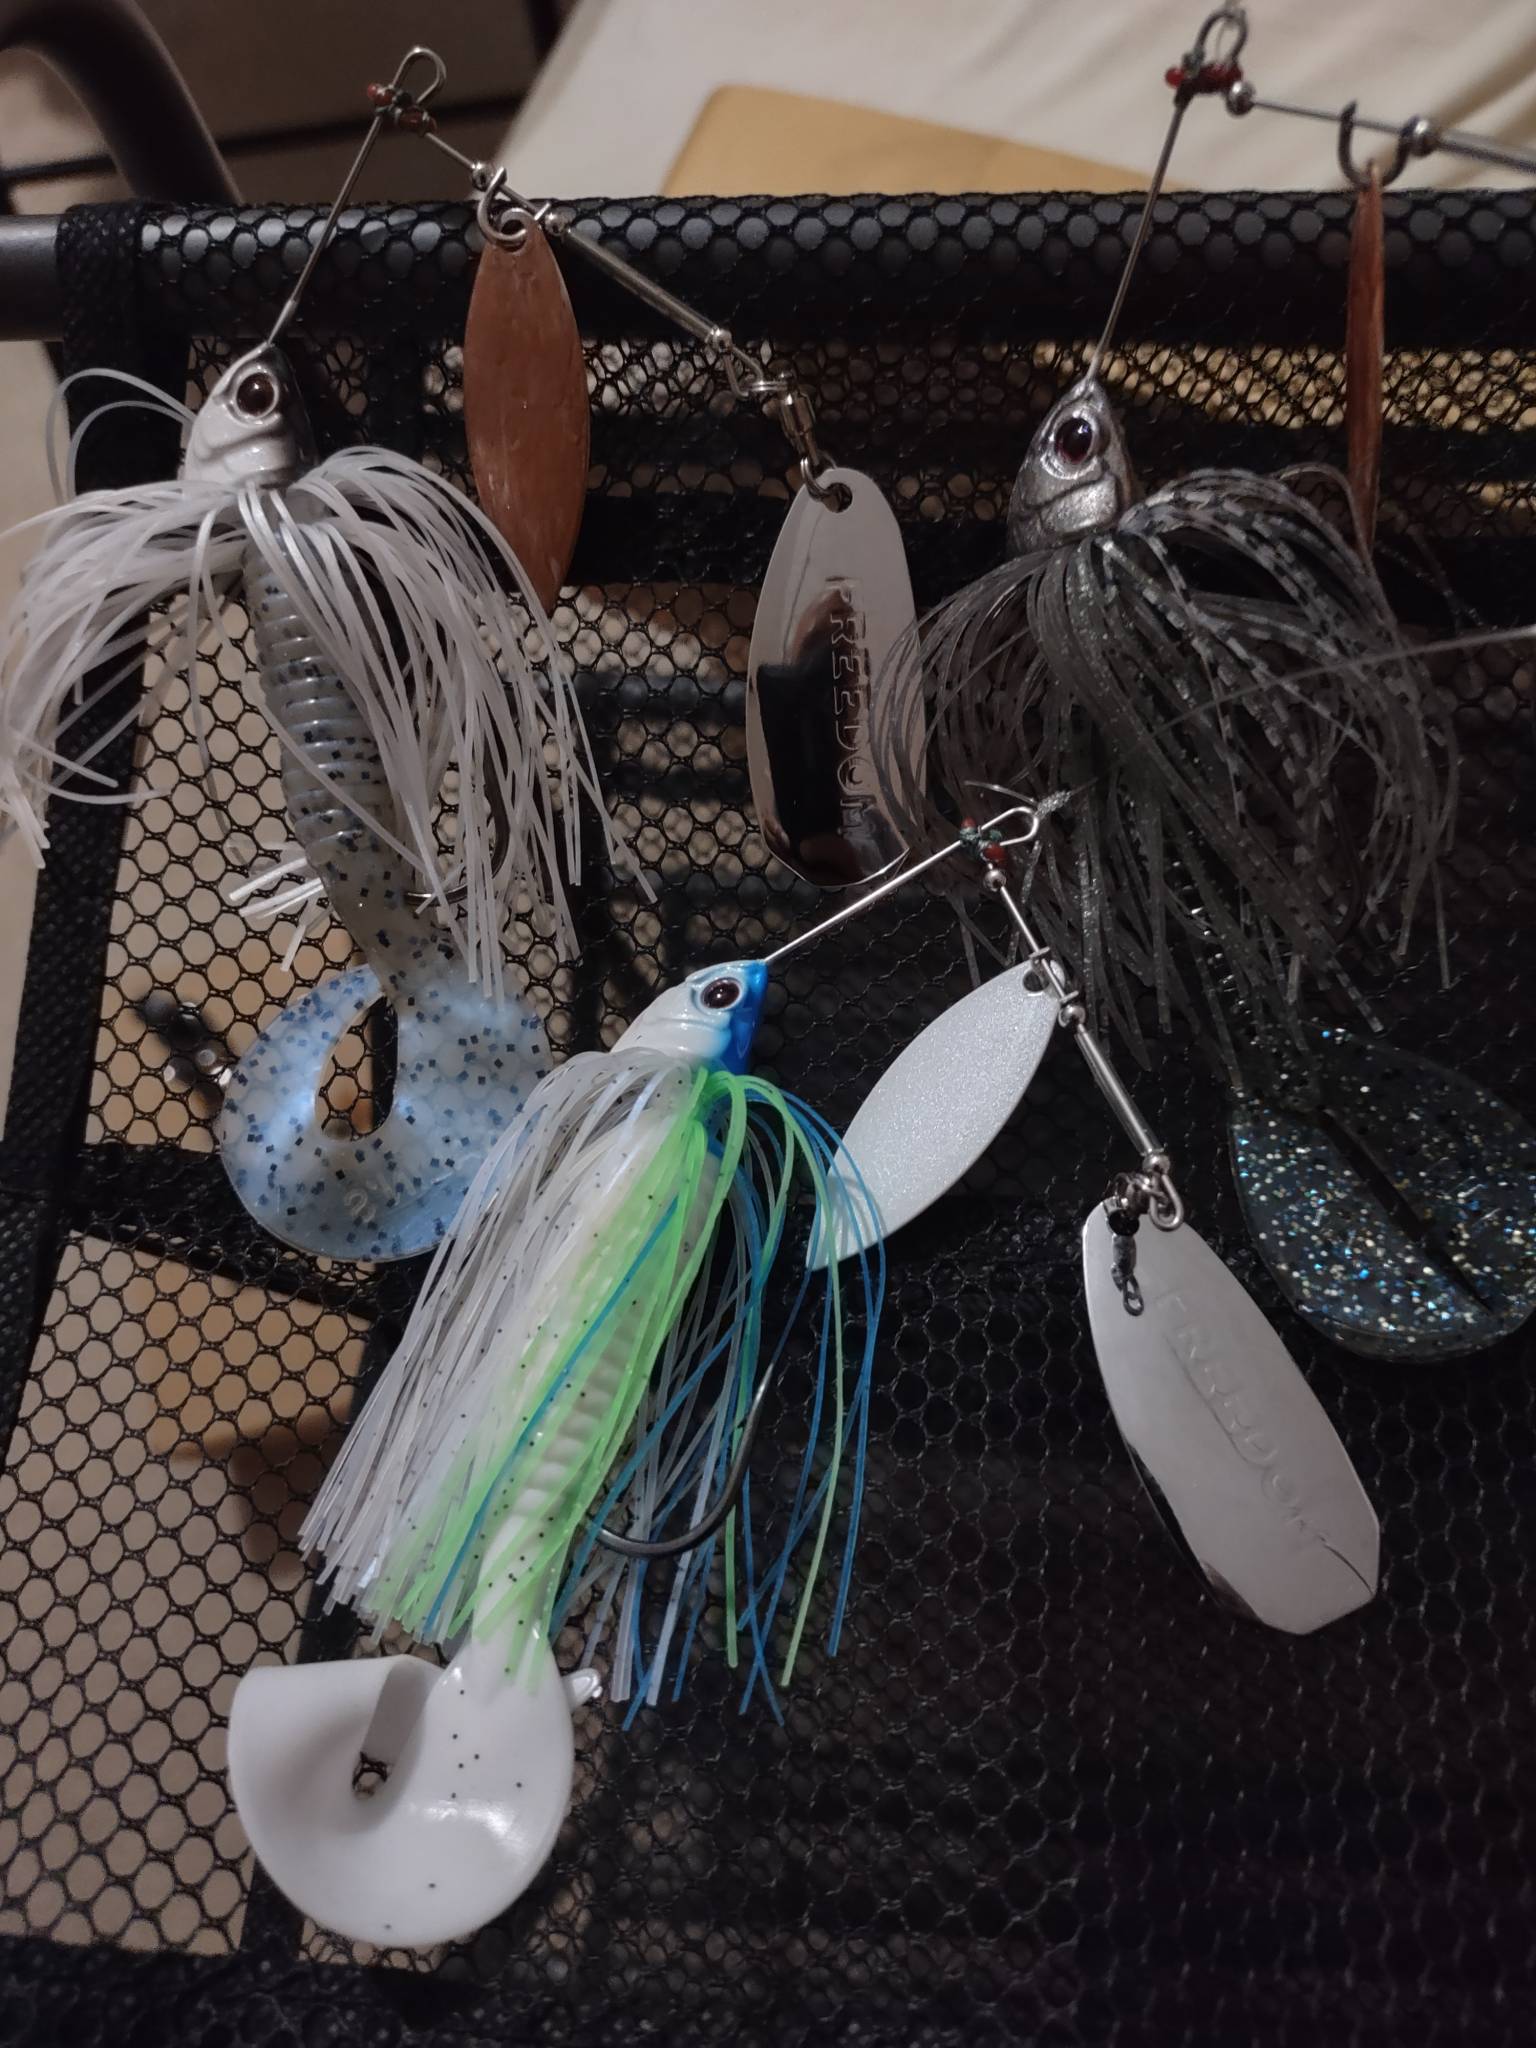 Trailer Hooks for Spinnerbaits - Fishing Tackle - Bass Fishing Forums